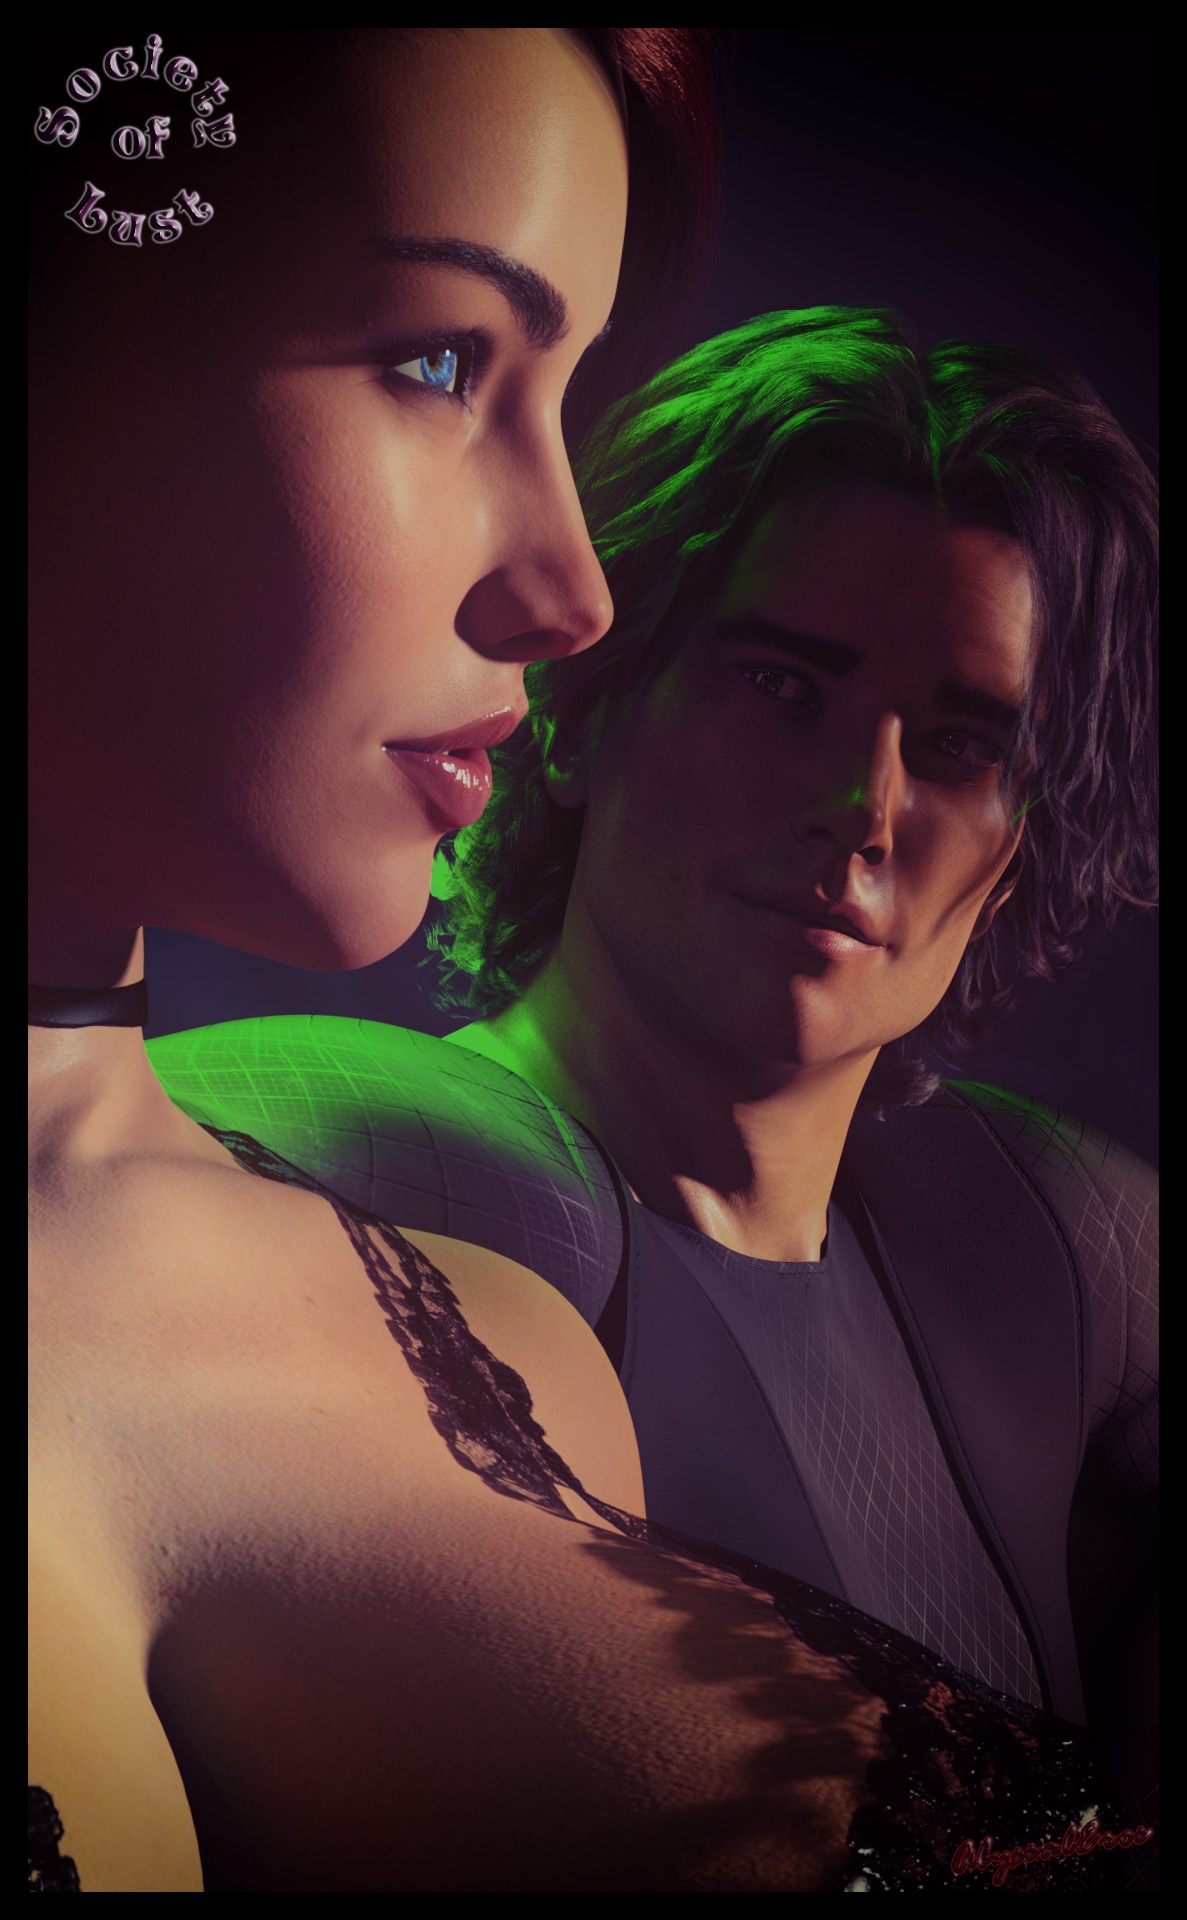 There are two additional images with Laura at the Art Stage  but she is posing with Dante this time.
Here is the first one  a nice twin-portrait shot.